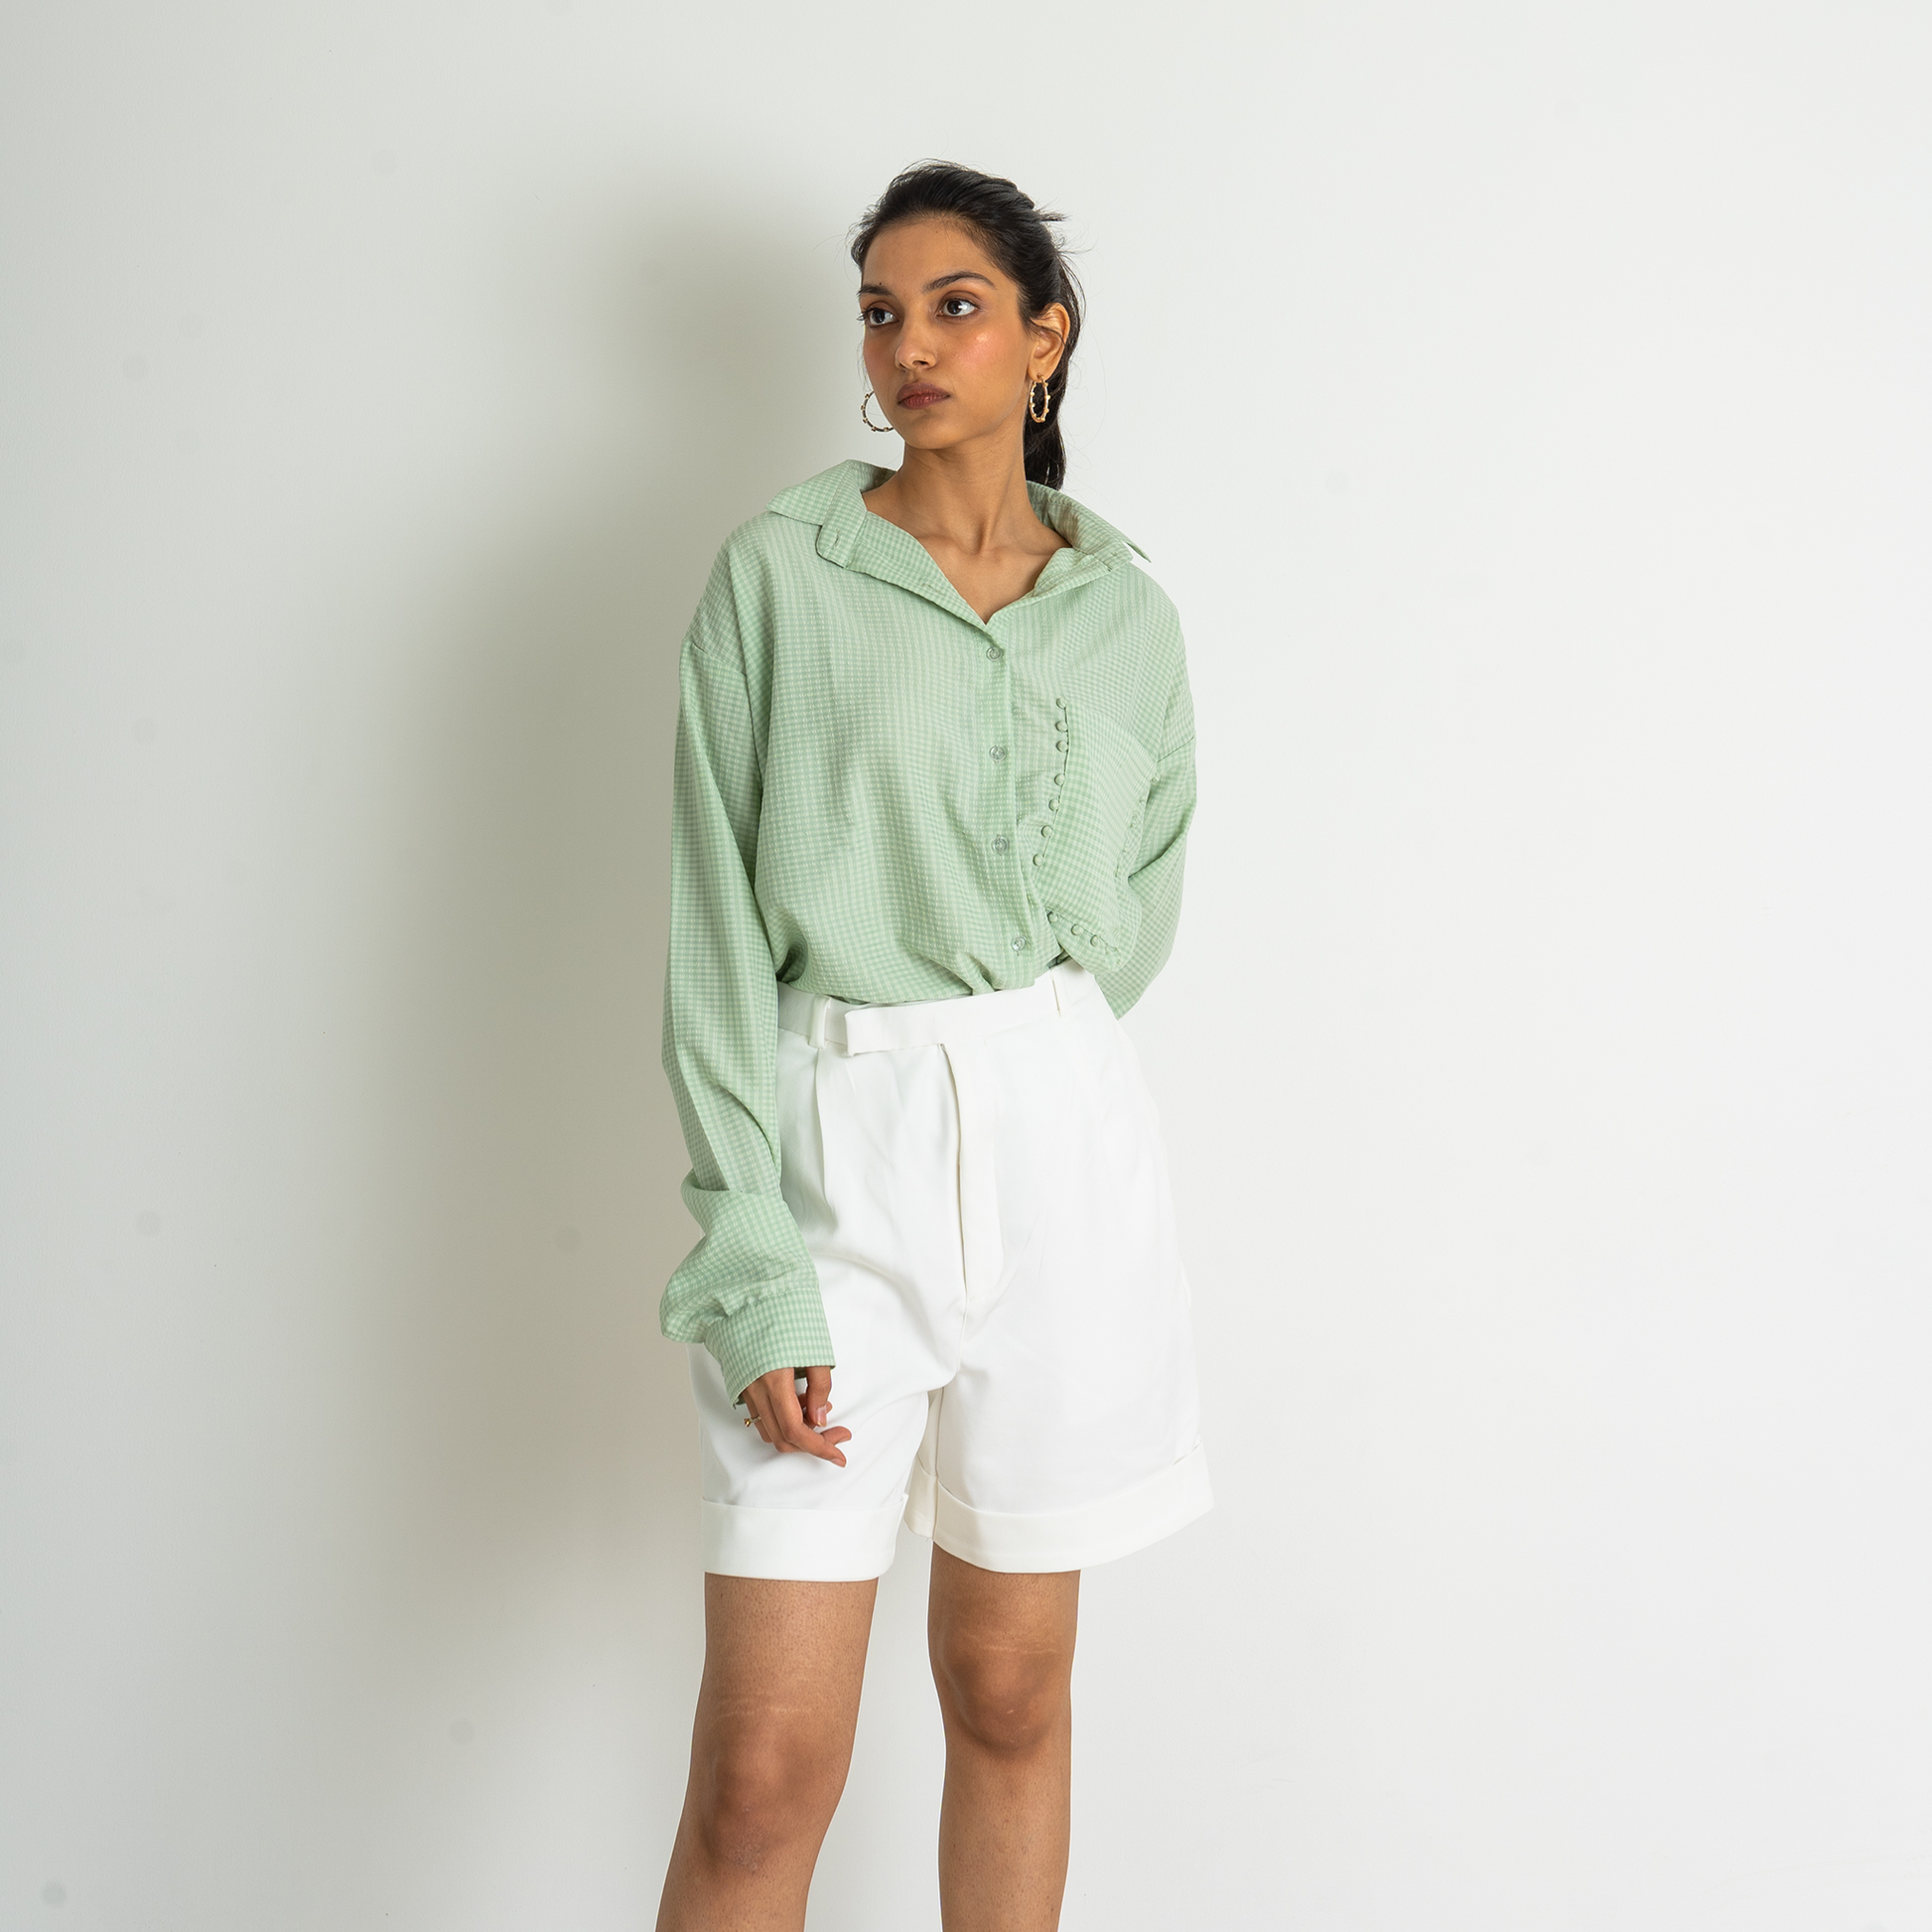 Tailored shorts in a stretchable and breathable fabric. High waist with pleats at the front, and a zip fly with a concealed button and hook-and-eye in the waistband. Diagonal side pockets, and folded legs with creases front and back.